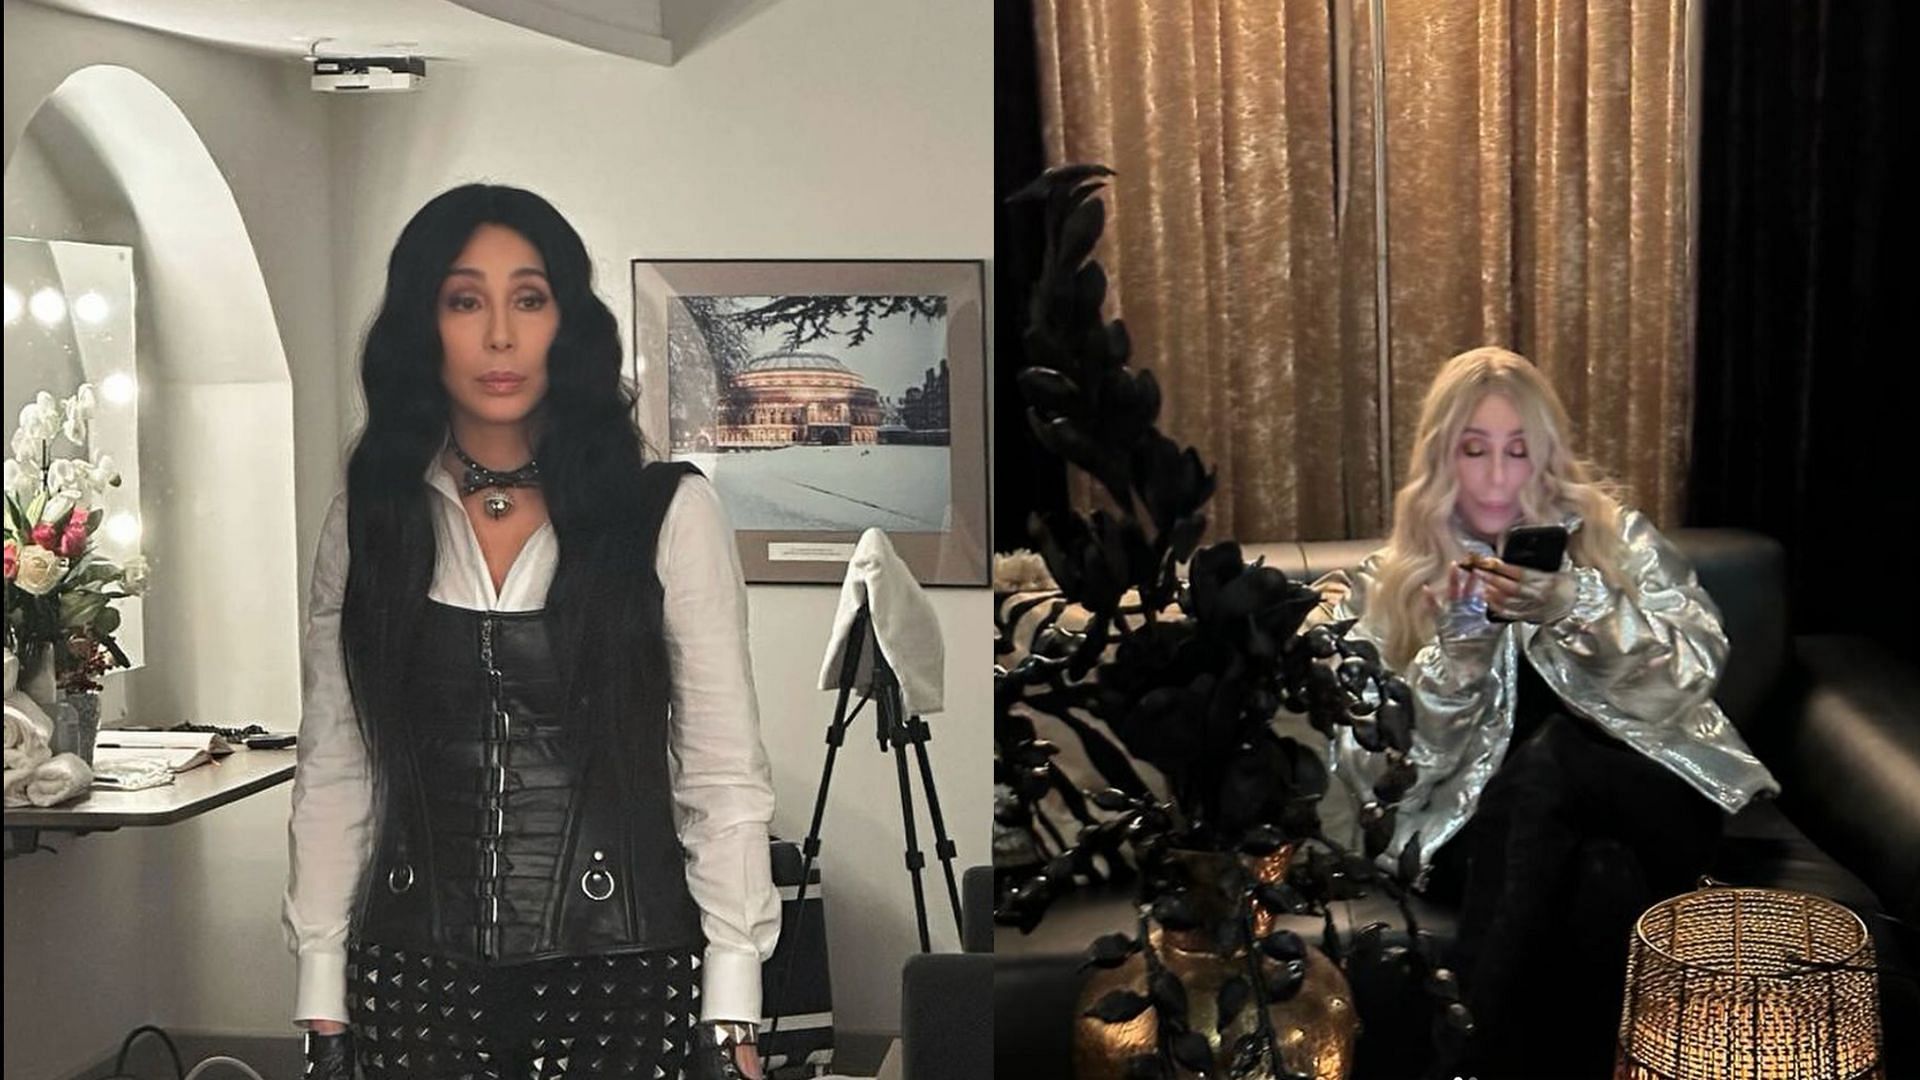 Who is Marieangela King? (Image via snip from Instagram/@cher)